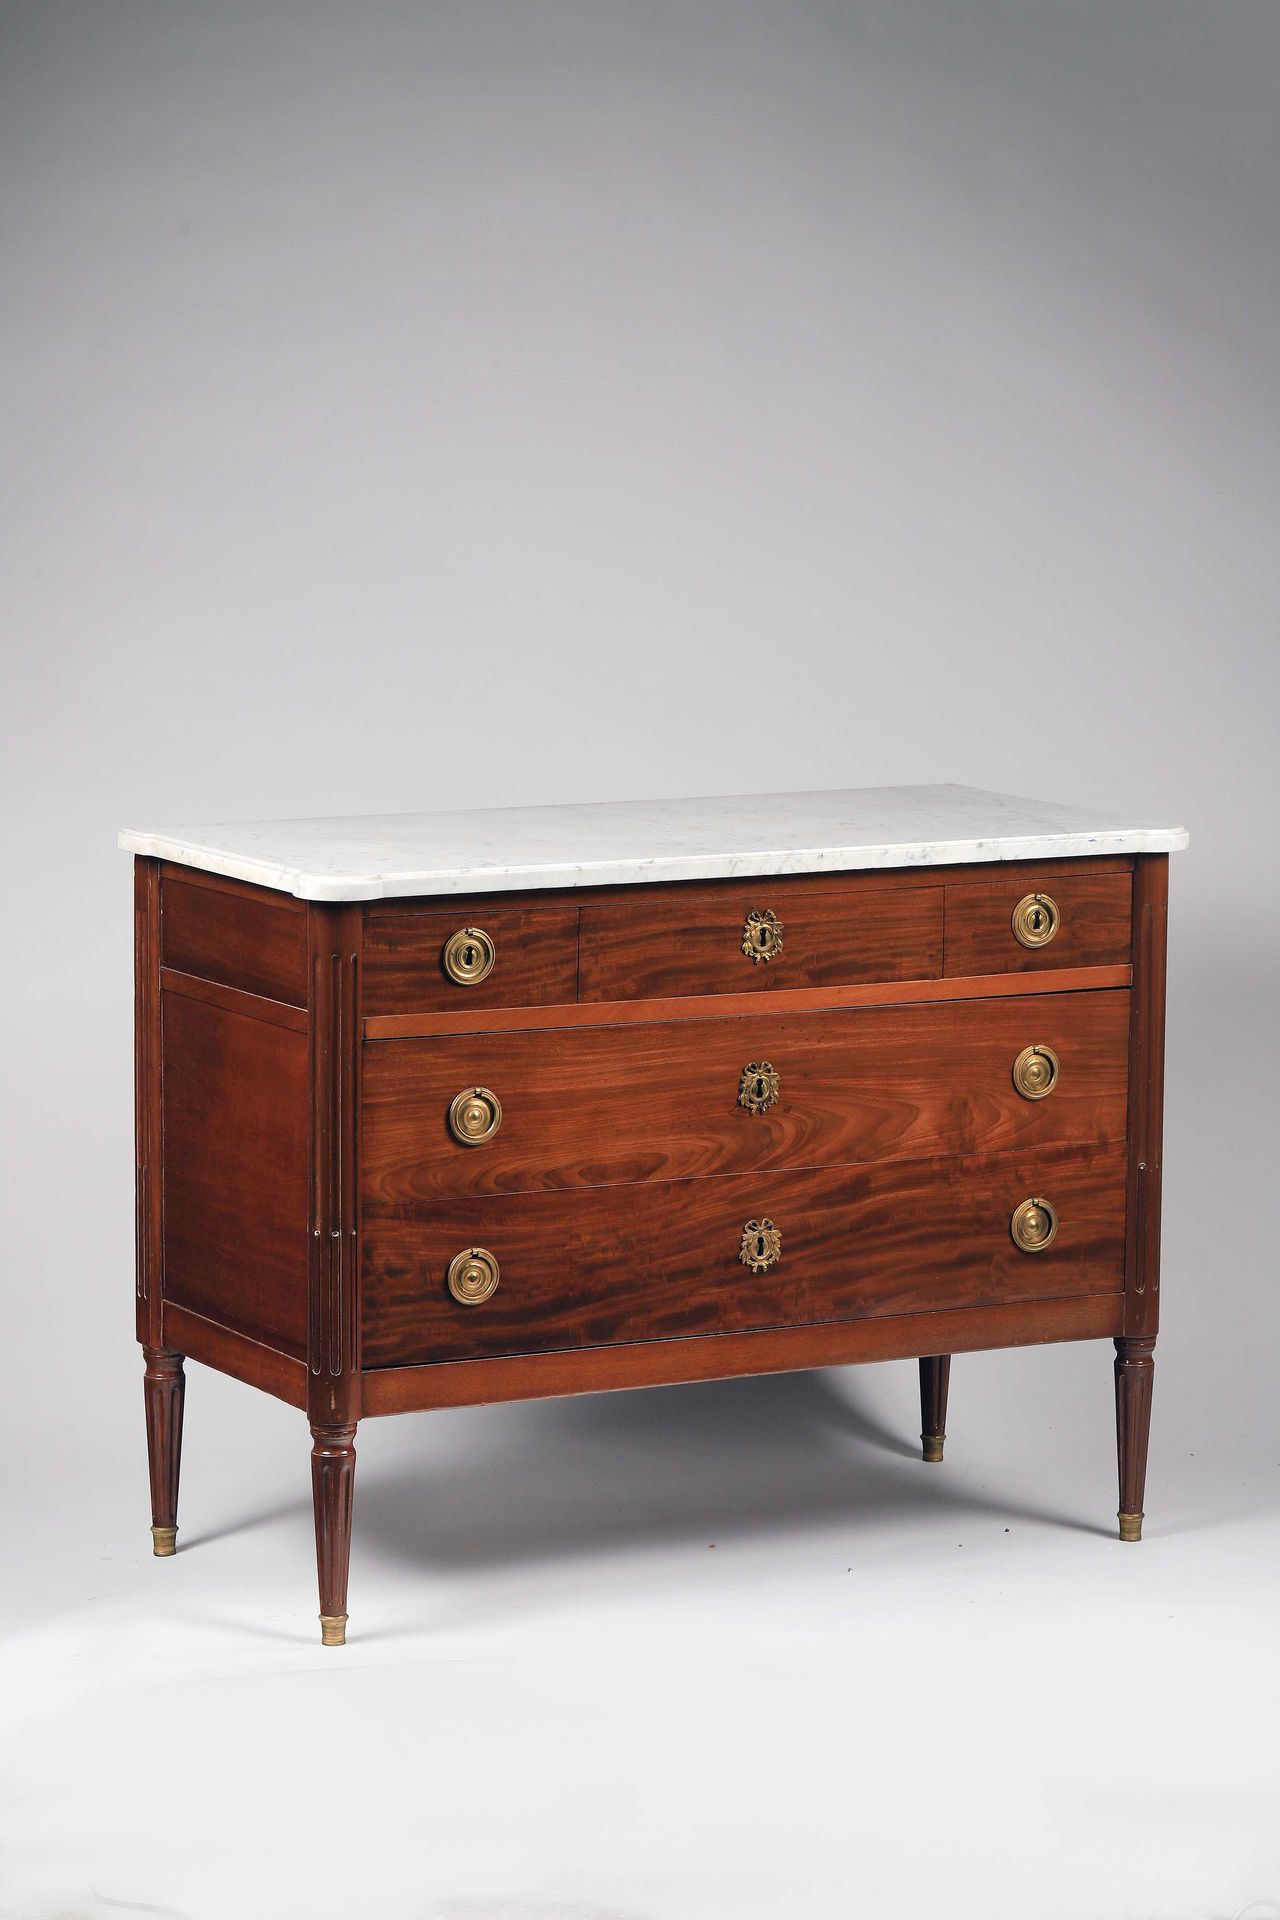 Null Jean CAUMONT, Master in Paris in 1774

A straight chest of drawers with two&hellip;